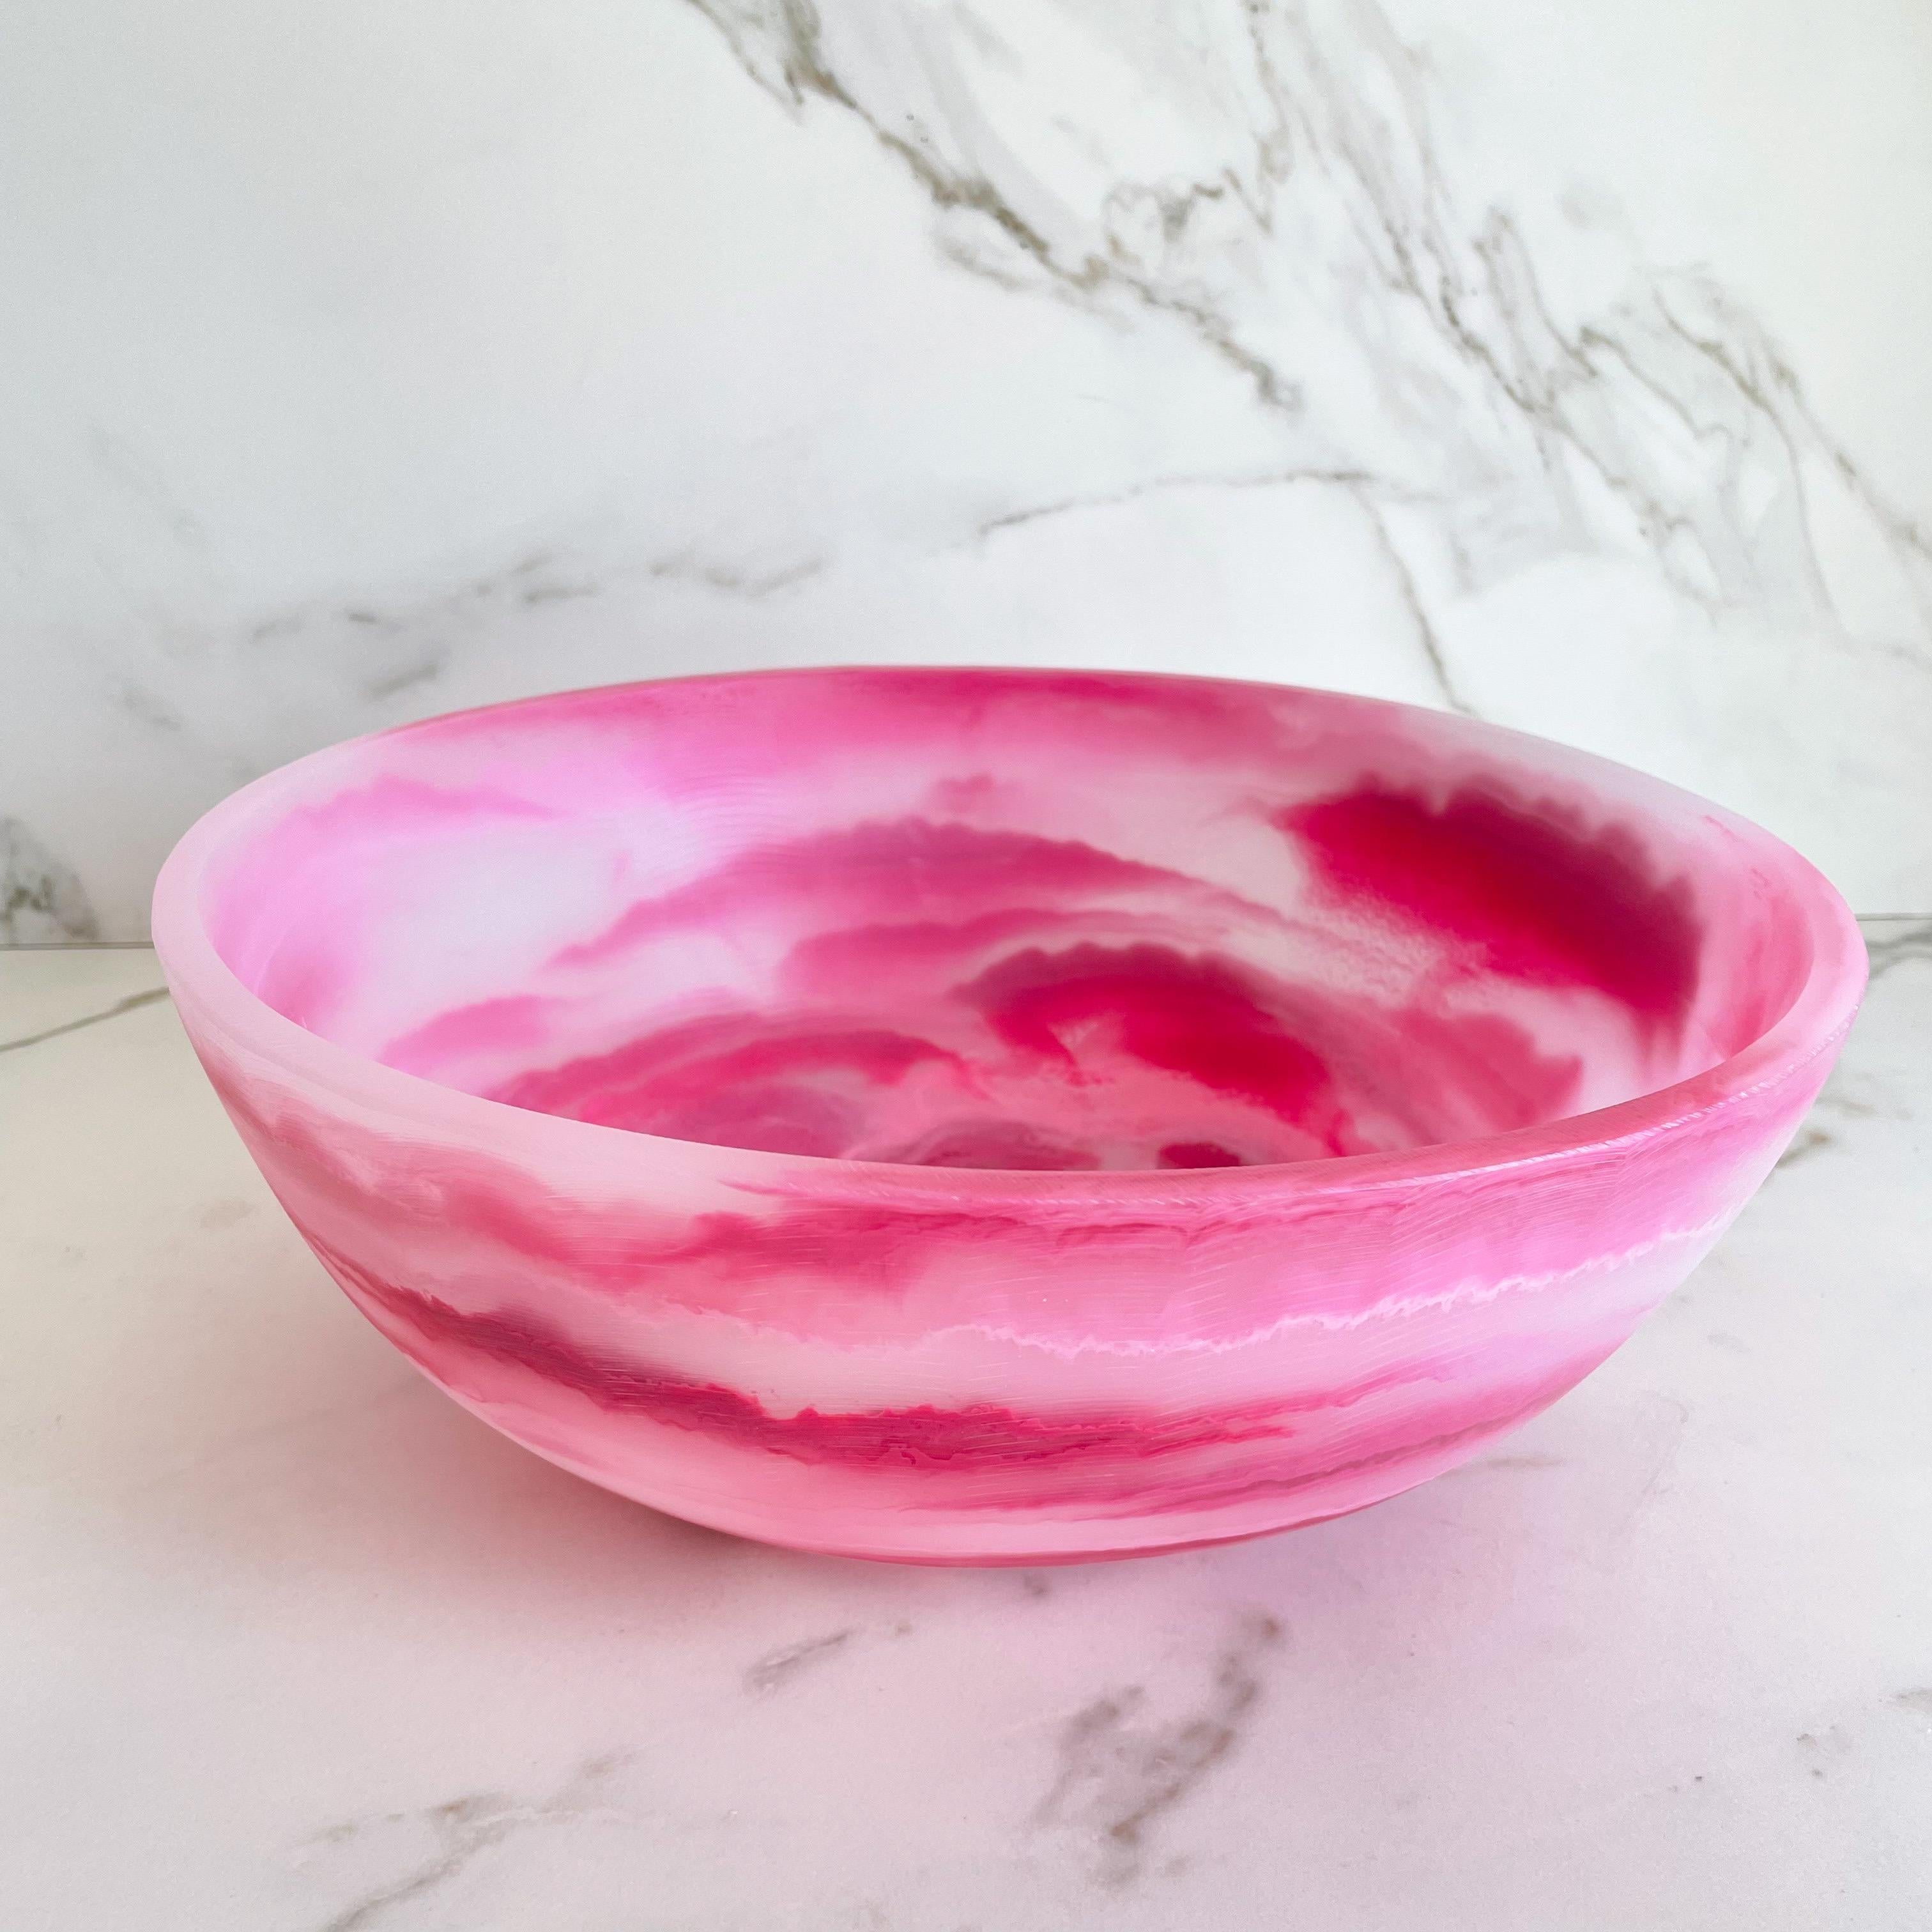 Our colorful bowl is handmade in traslucid white resin with marbled texture in pink and light pink. Its fun and colorful design makes it a statement piece and can be used as decor,fruit platter or to serve cold food.

Designed by Paola Valle and